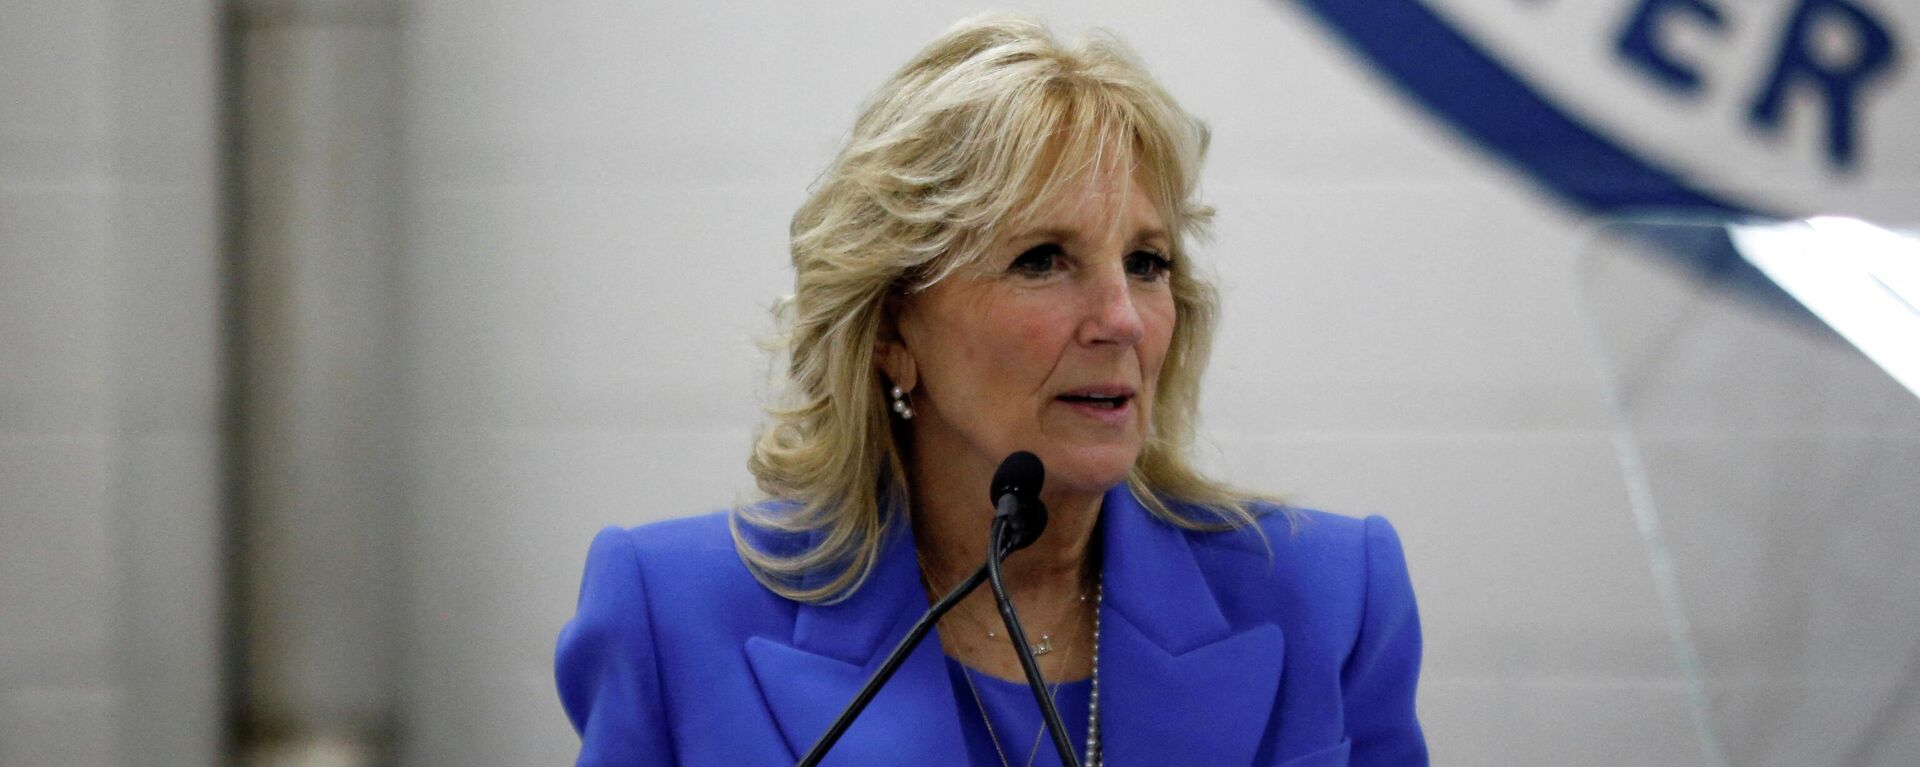 U.S. First Lady Jill Biden delivers remarks during a closed discussion and book reading event with U.S. military families and Blue Star families at the U.S. Coast Guard Air Station Miami in Opa-Locka Executive Airport, in Opa-Locka, Florida, U.S. February 18, 2022 - Sputnik International, 1920, 01.03.2022